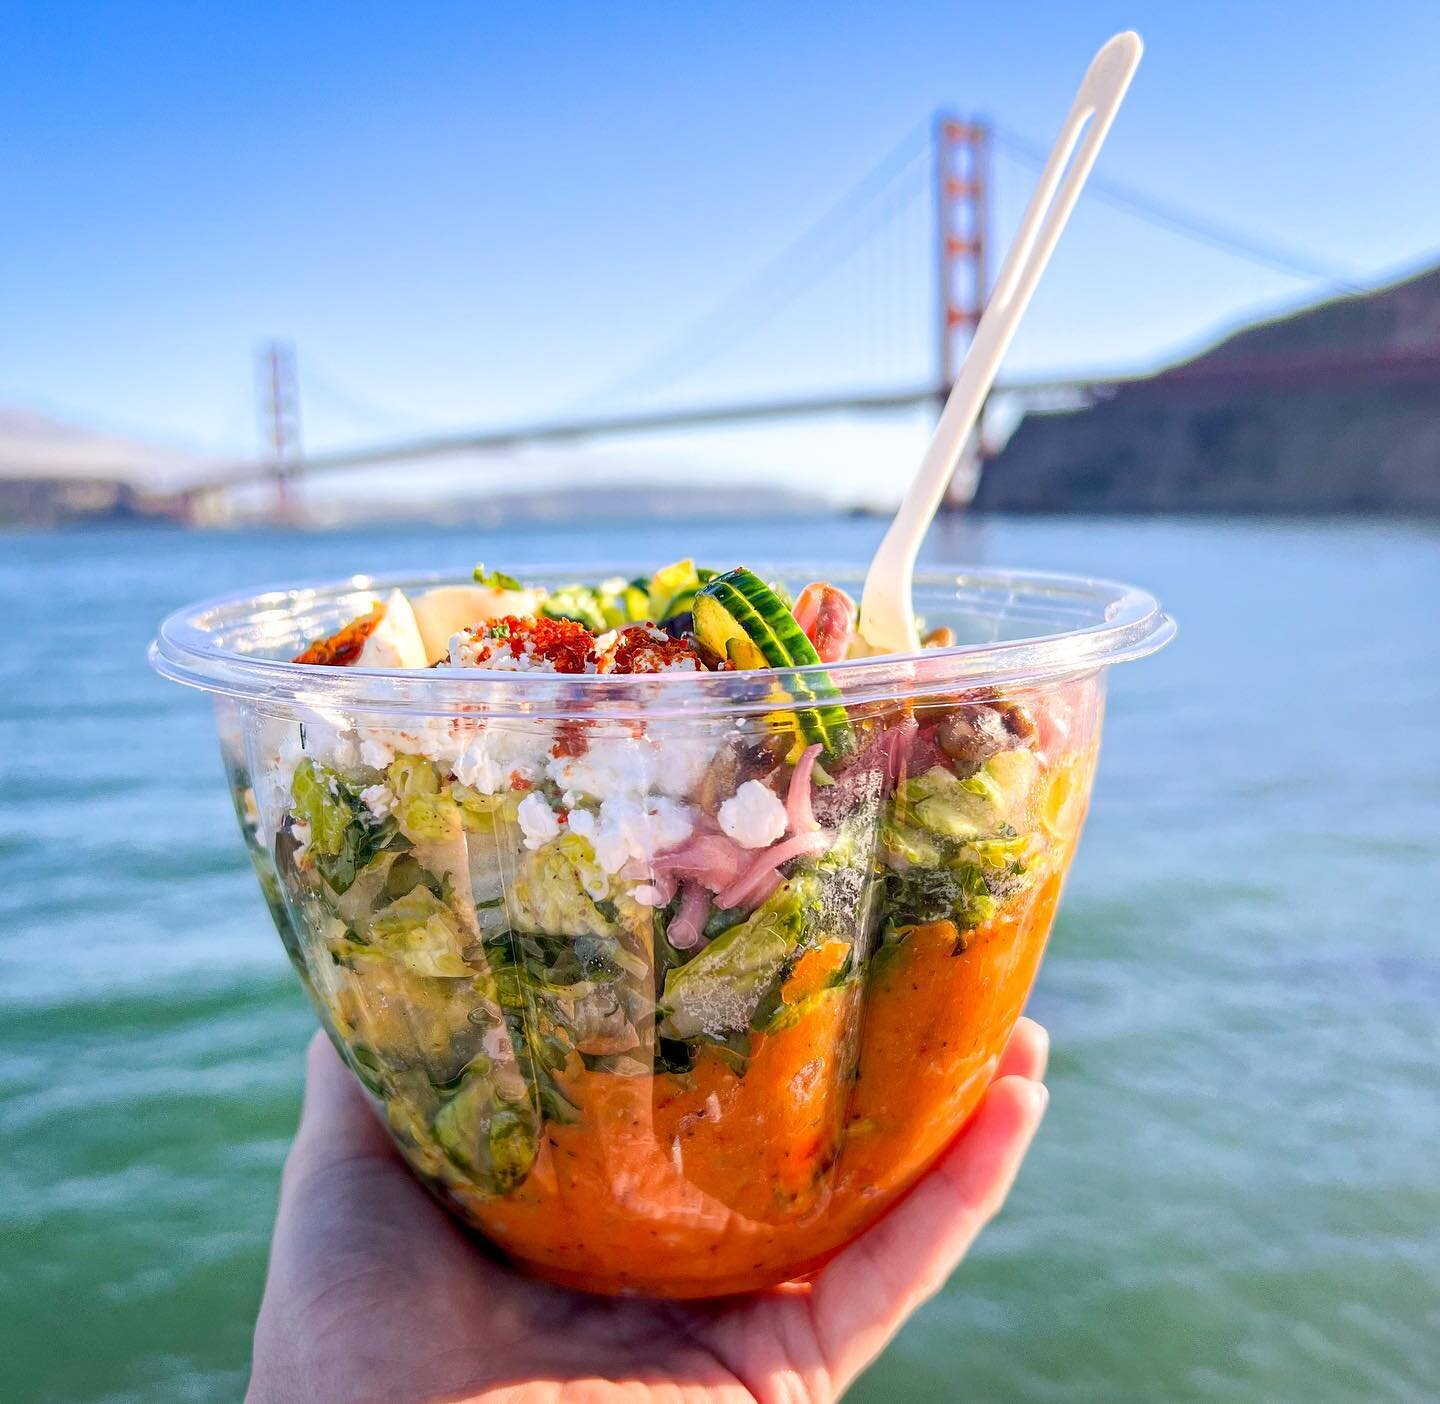 City vibes with saucy attitude..🤩🥗 Eating healthy on a shiny #Sunday has never tasted better!😎
.
.
.
.
#salad #saladlove #saladoftheday #healthyfood #vegetarian #foodie #sanfrancisco #losangeles